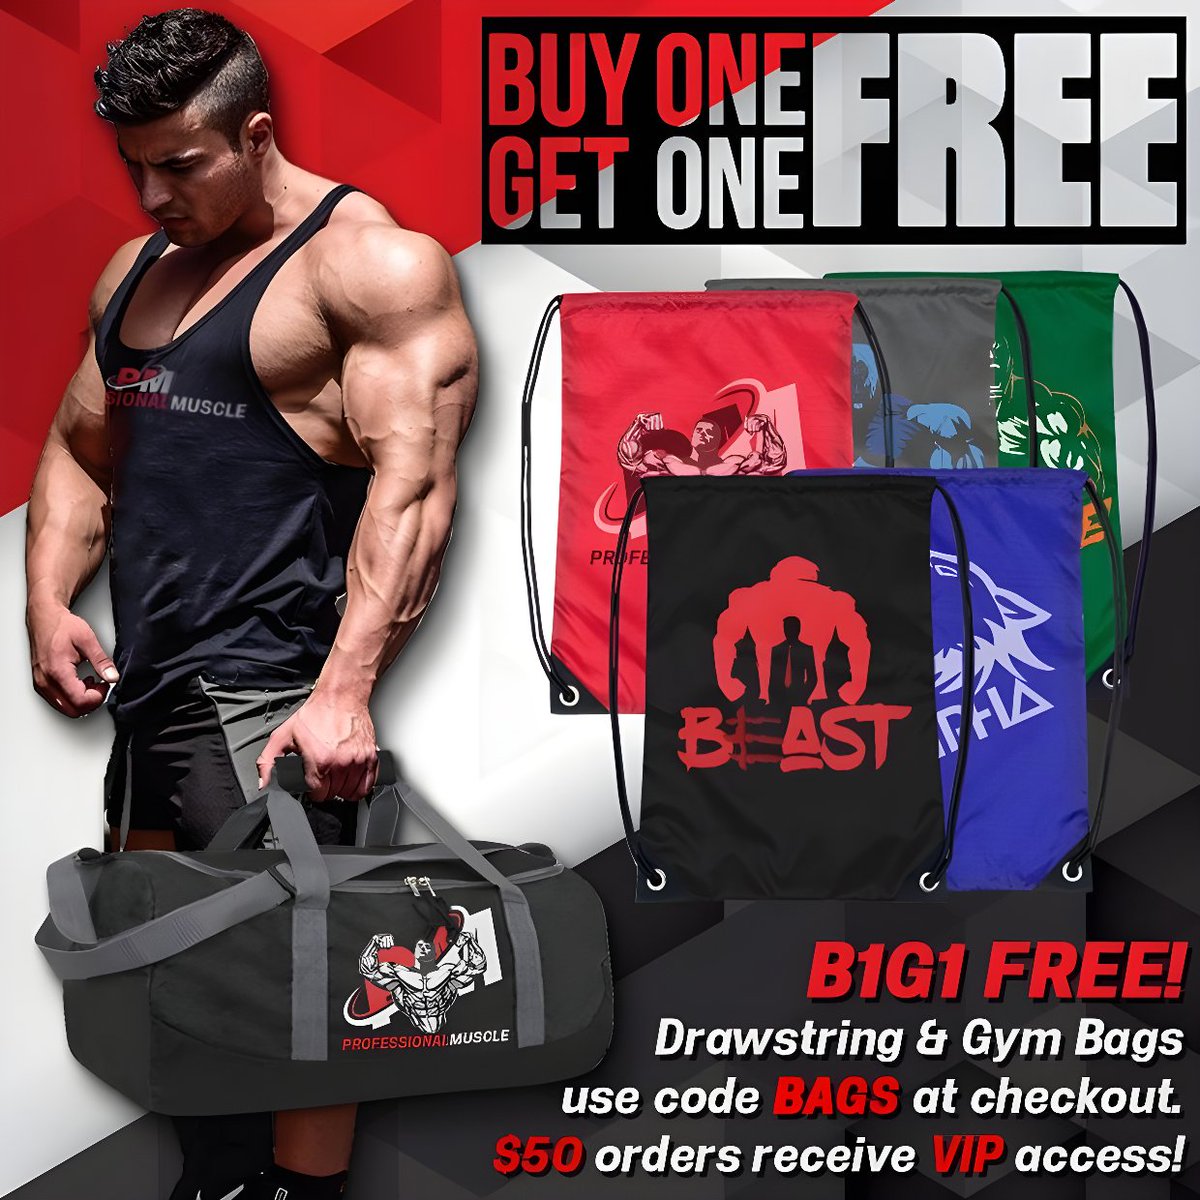 B1G1 FREE on the Personalized Drawstring and Gym Bags!!! Use code BAGS at checkout!
professionalmusclestore.com/search?q=BAGS
##supplements #ripped #muscle #bodybuilding #pump #training #strong #gymlife #gym #workout #fitness #squat #gains #shredded #ifbb #instafit #sale